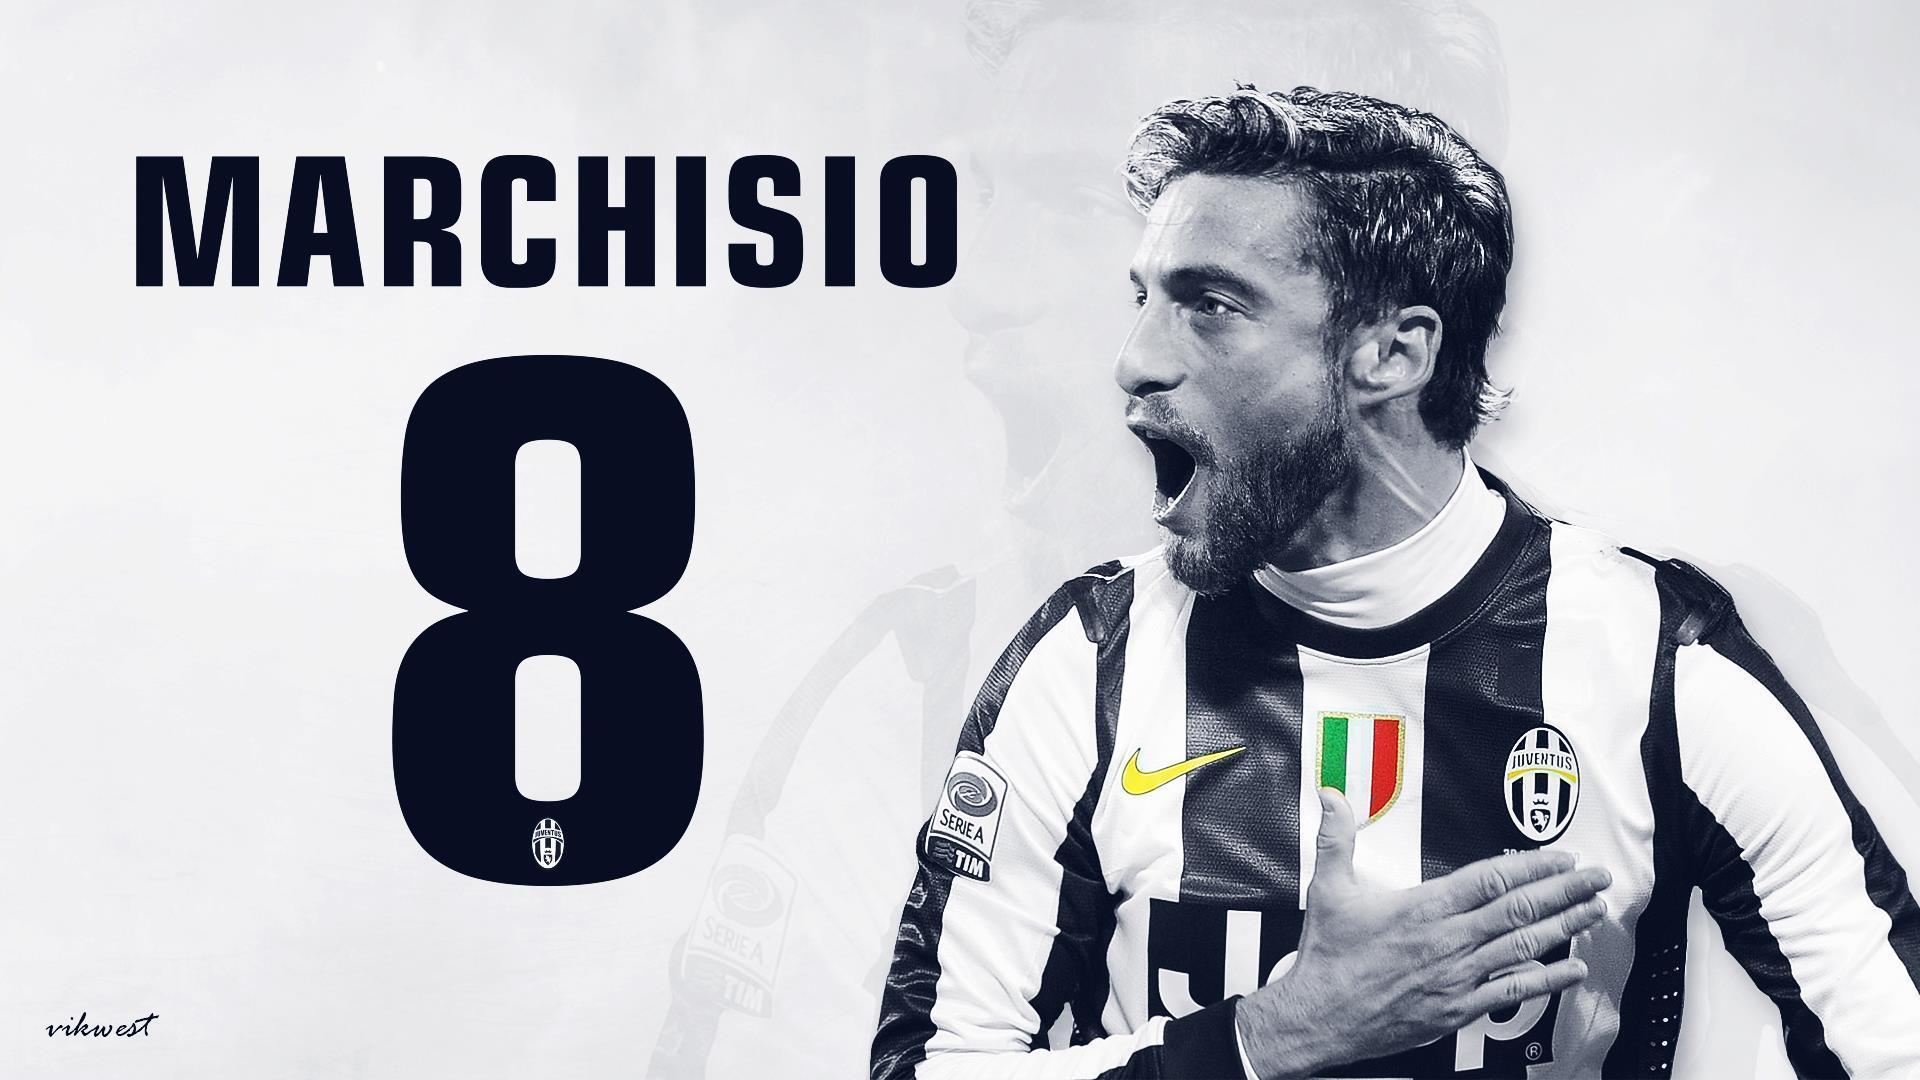 Download Wallpaper 1920x1080 Claudio marchisio, Football player